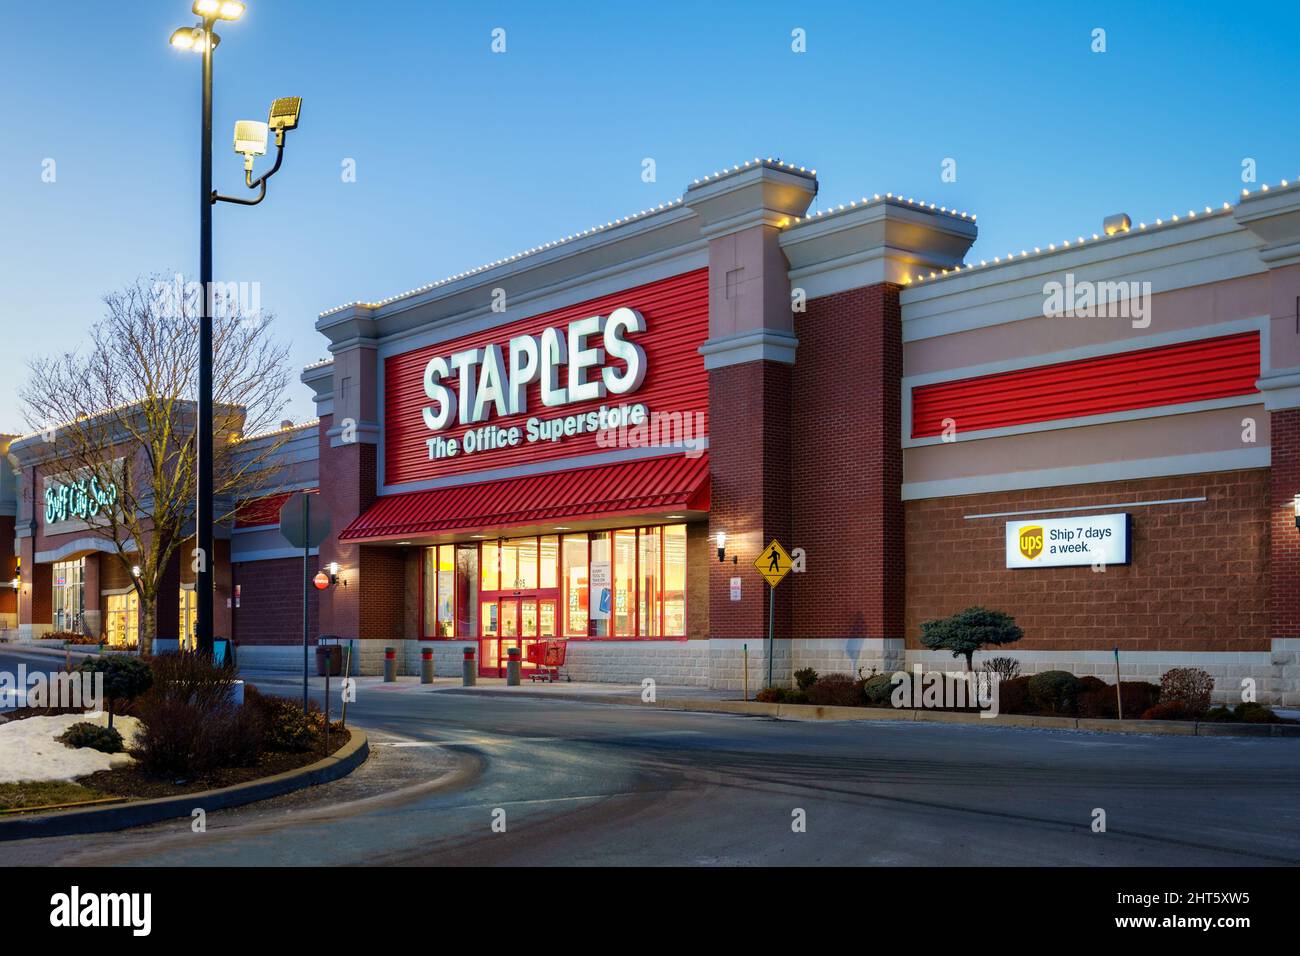 New Hartford, New York - Feb 24, 2022: Closeup Night View of Staples The Office Superstore Building Exterior. Staples Inc. is a US Office Retailer Stock Photo